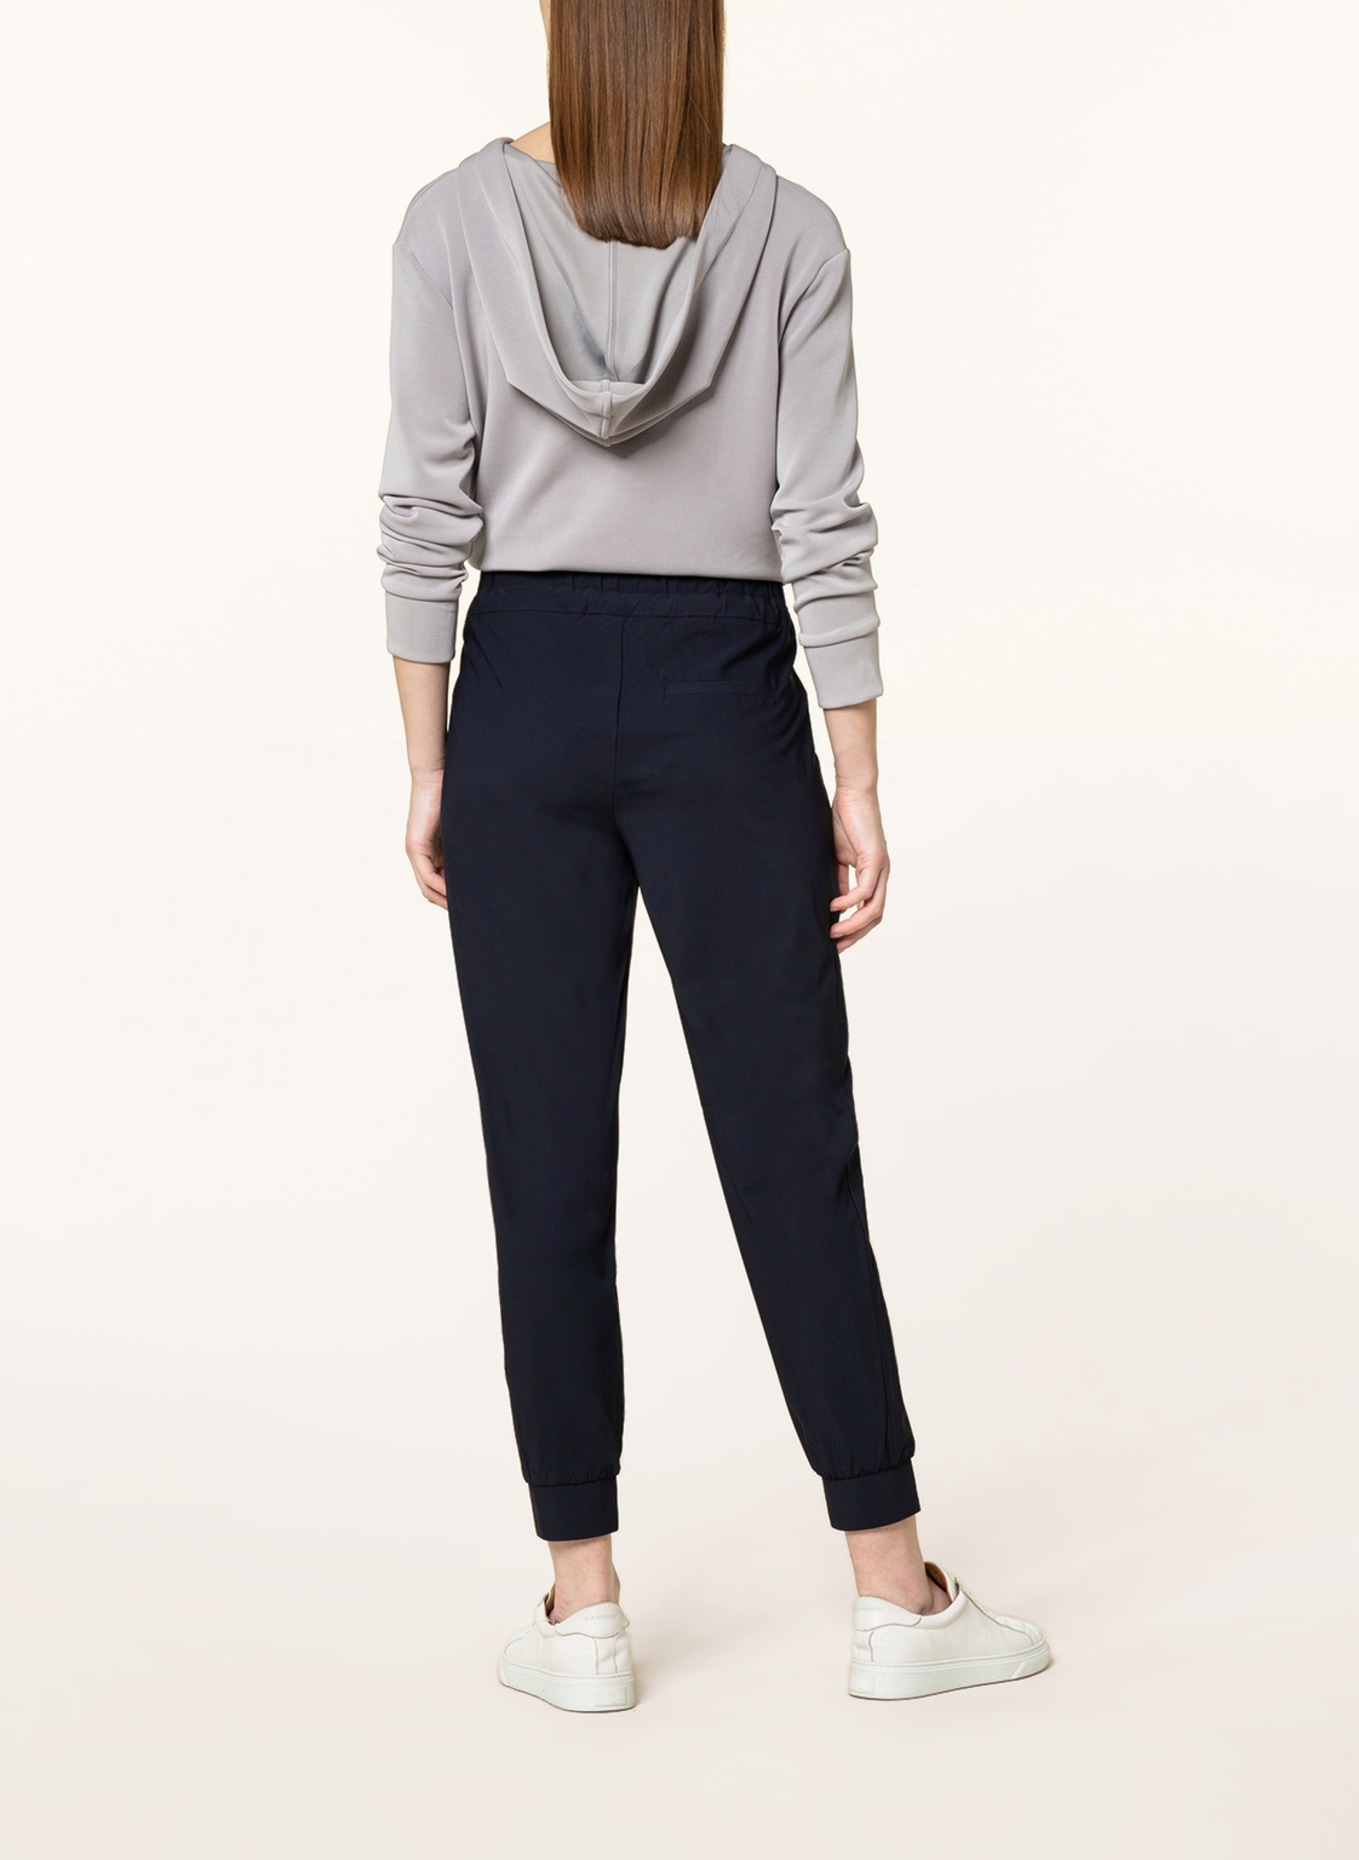 s.Oliver BLACK LABEL Trousers in jogger style, Color: DARK BLUE (Image 3)